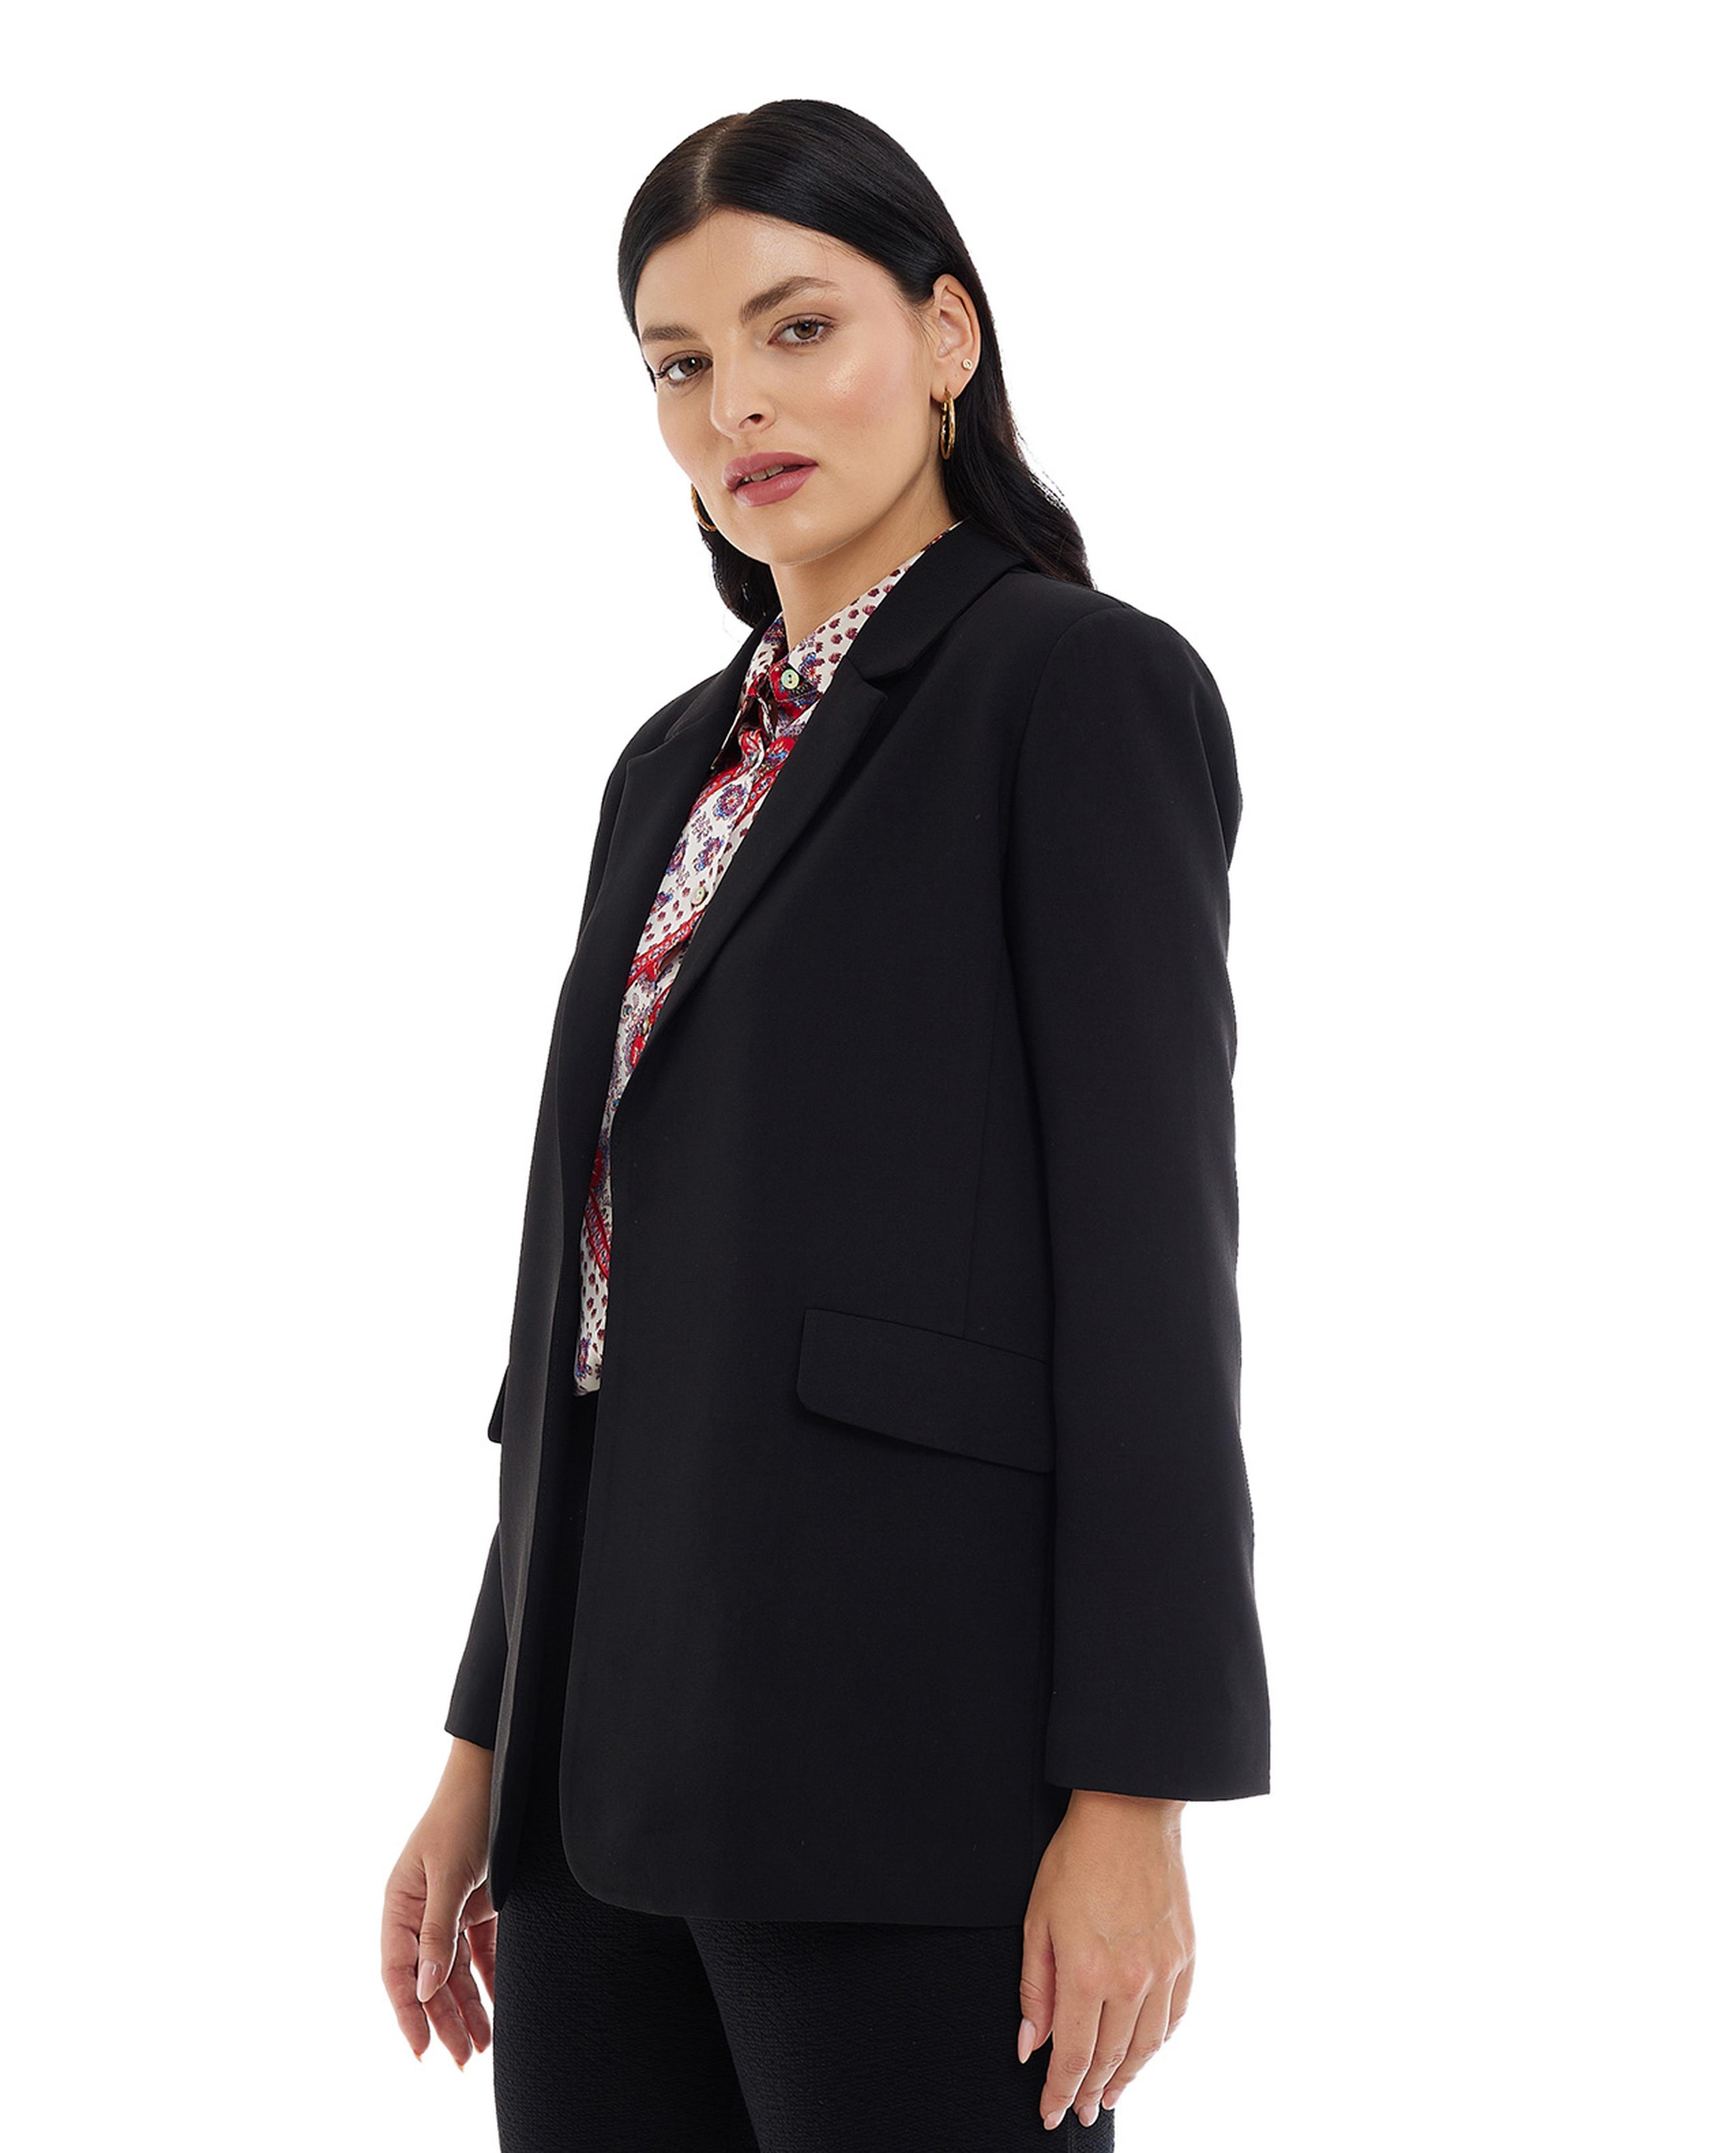 Solid Blazer with Lapel Collar and Long Sleeves